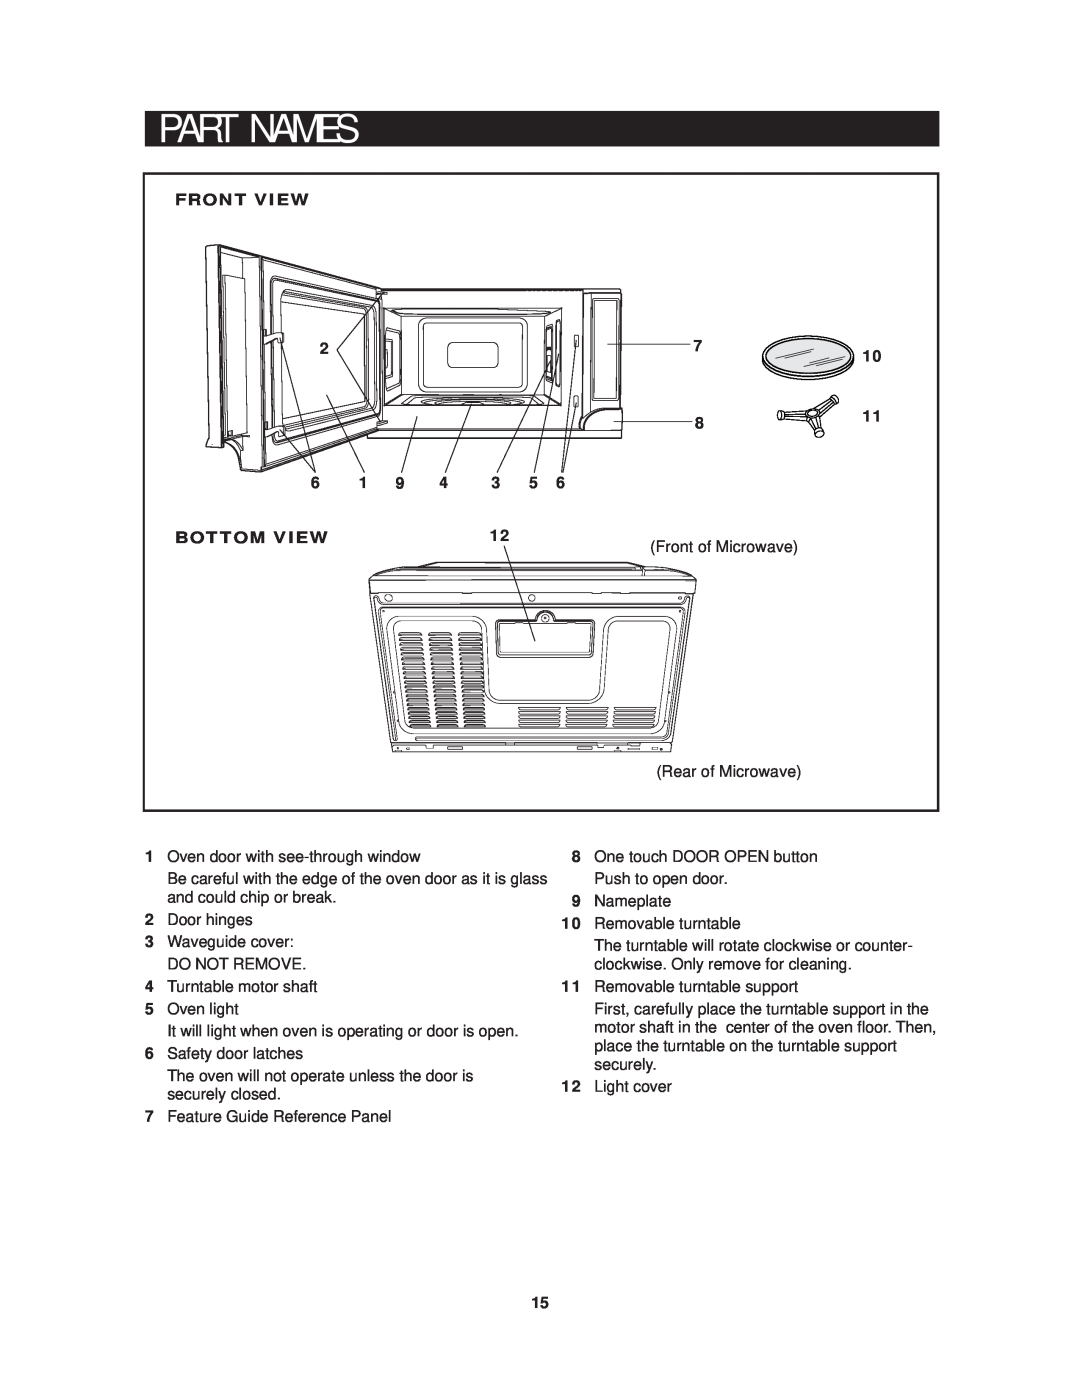 Sharp R-1214 operation manual P A R T N A M E S, Front View, Bottom View, Front of Microwave, Rear of Microwave 